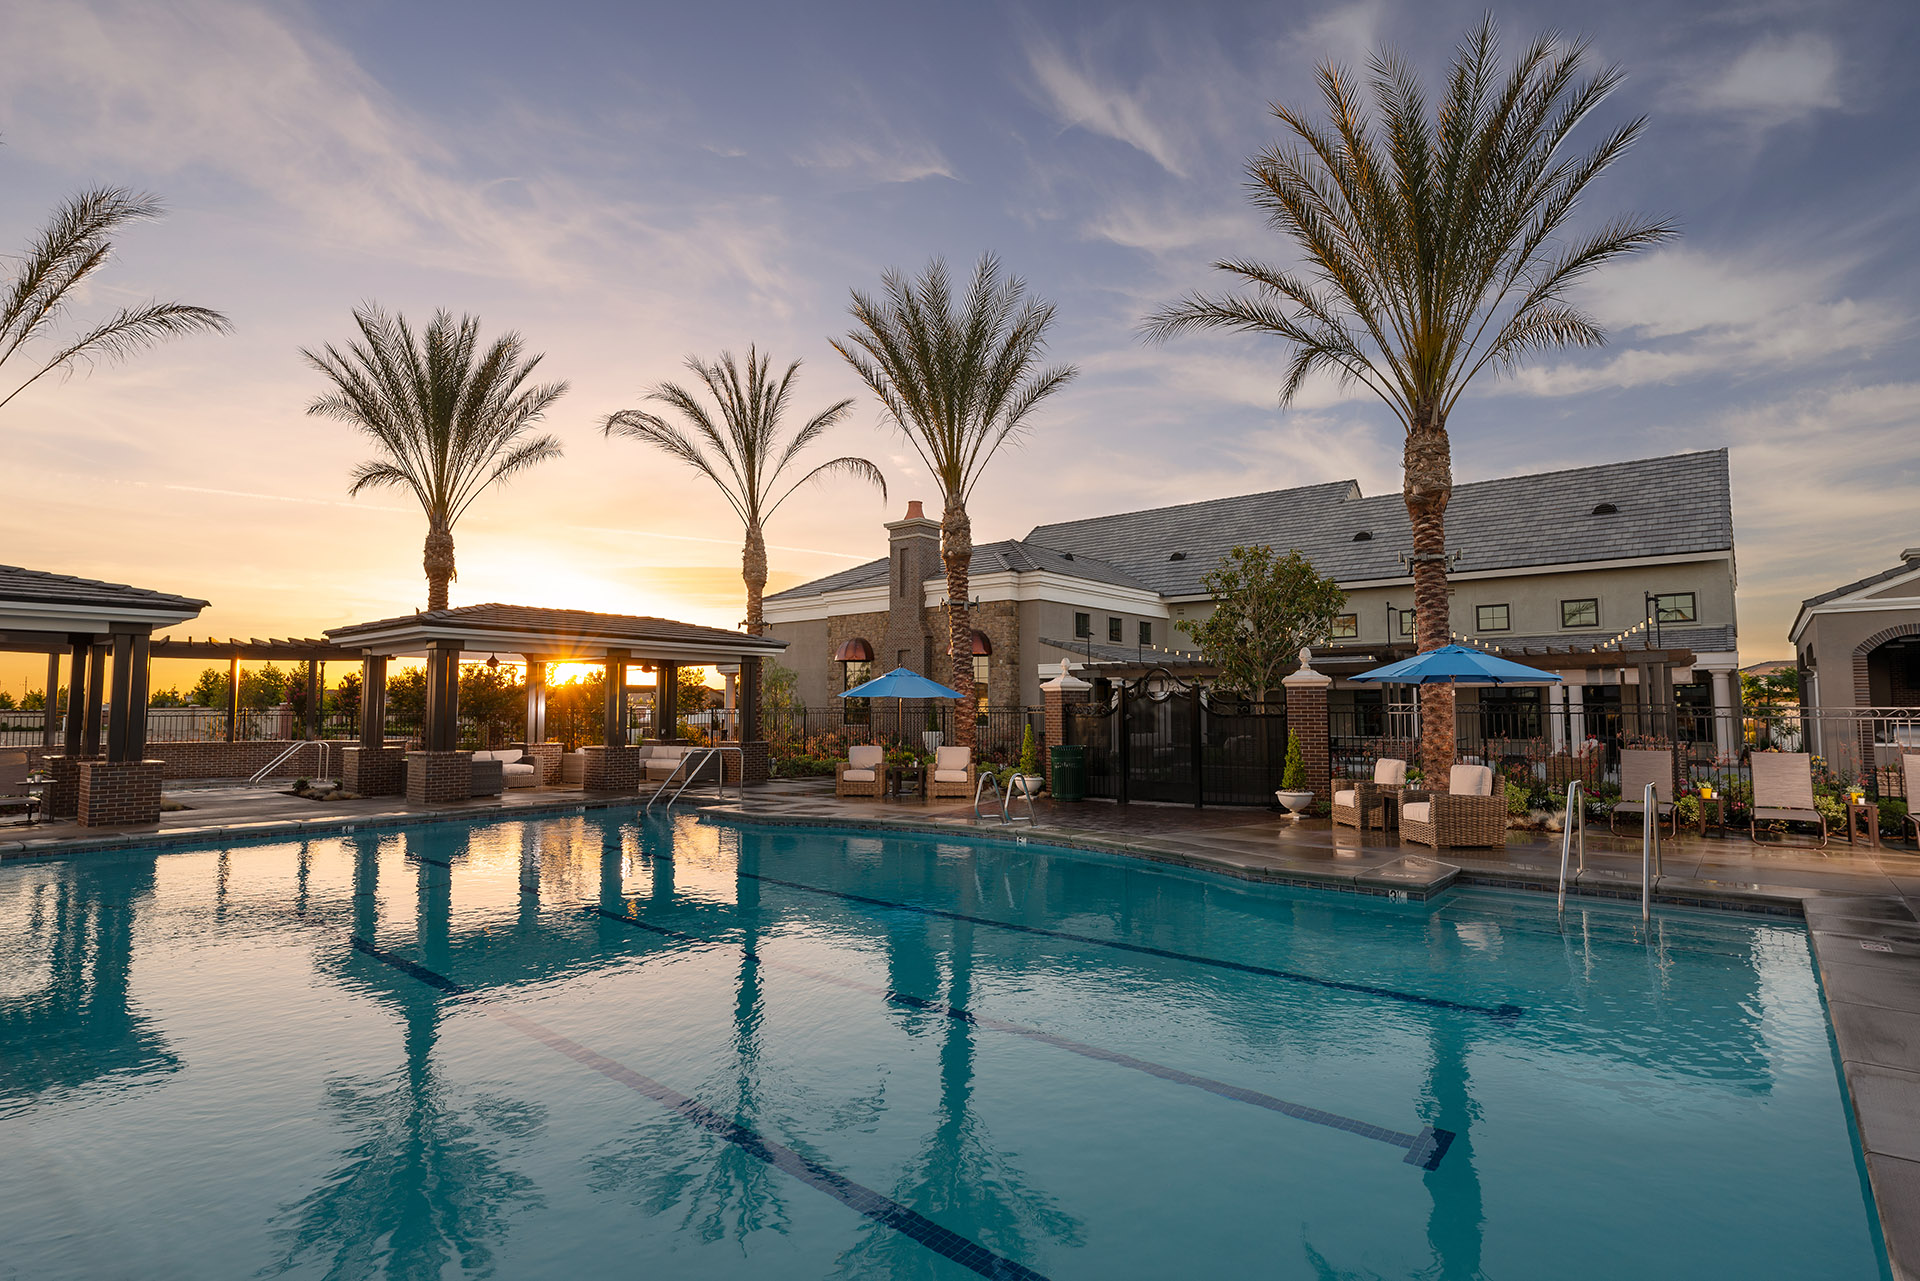 A serene poolside view at sunset with calm waters reflecting palm trees, under a clear sky, adjacent to a cozy building and lounging areas.